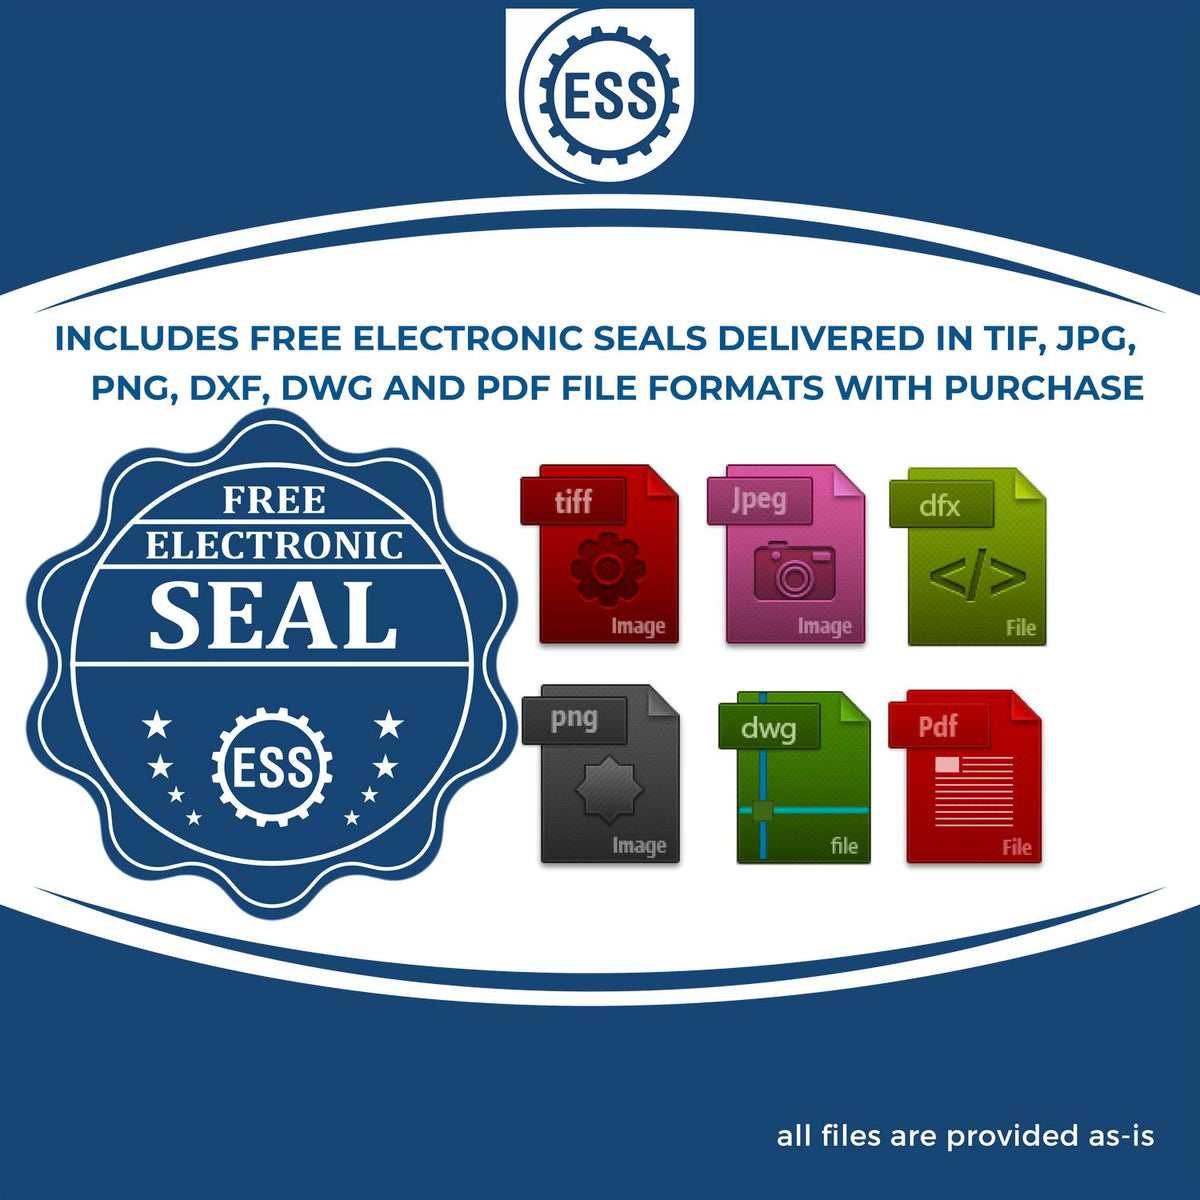 An infographic for the free electronic seal for the Self-Inking Rectangular South Dakota Notary Stamp illustrating the different file type icons such as DXF, DWG, TIF, JPG and PNG.